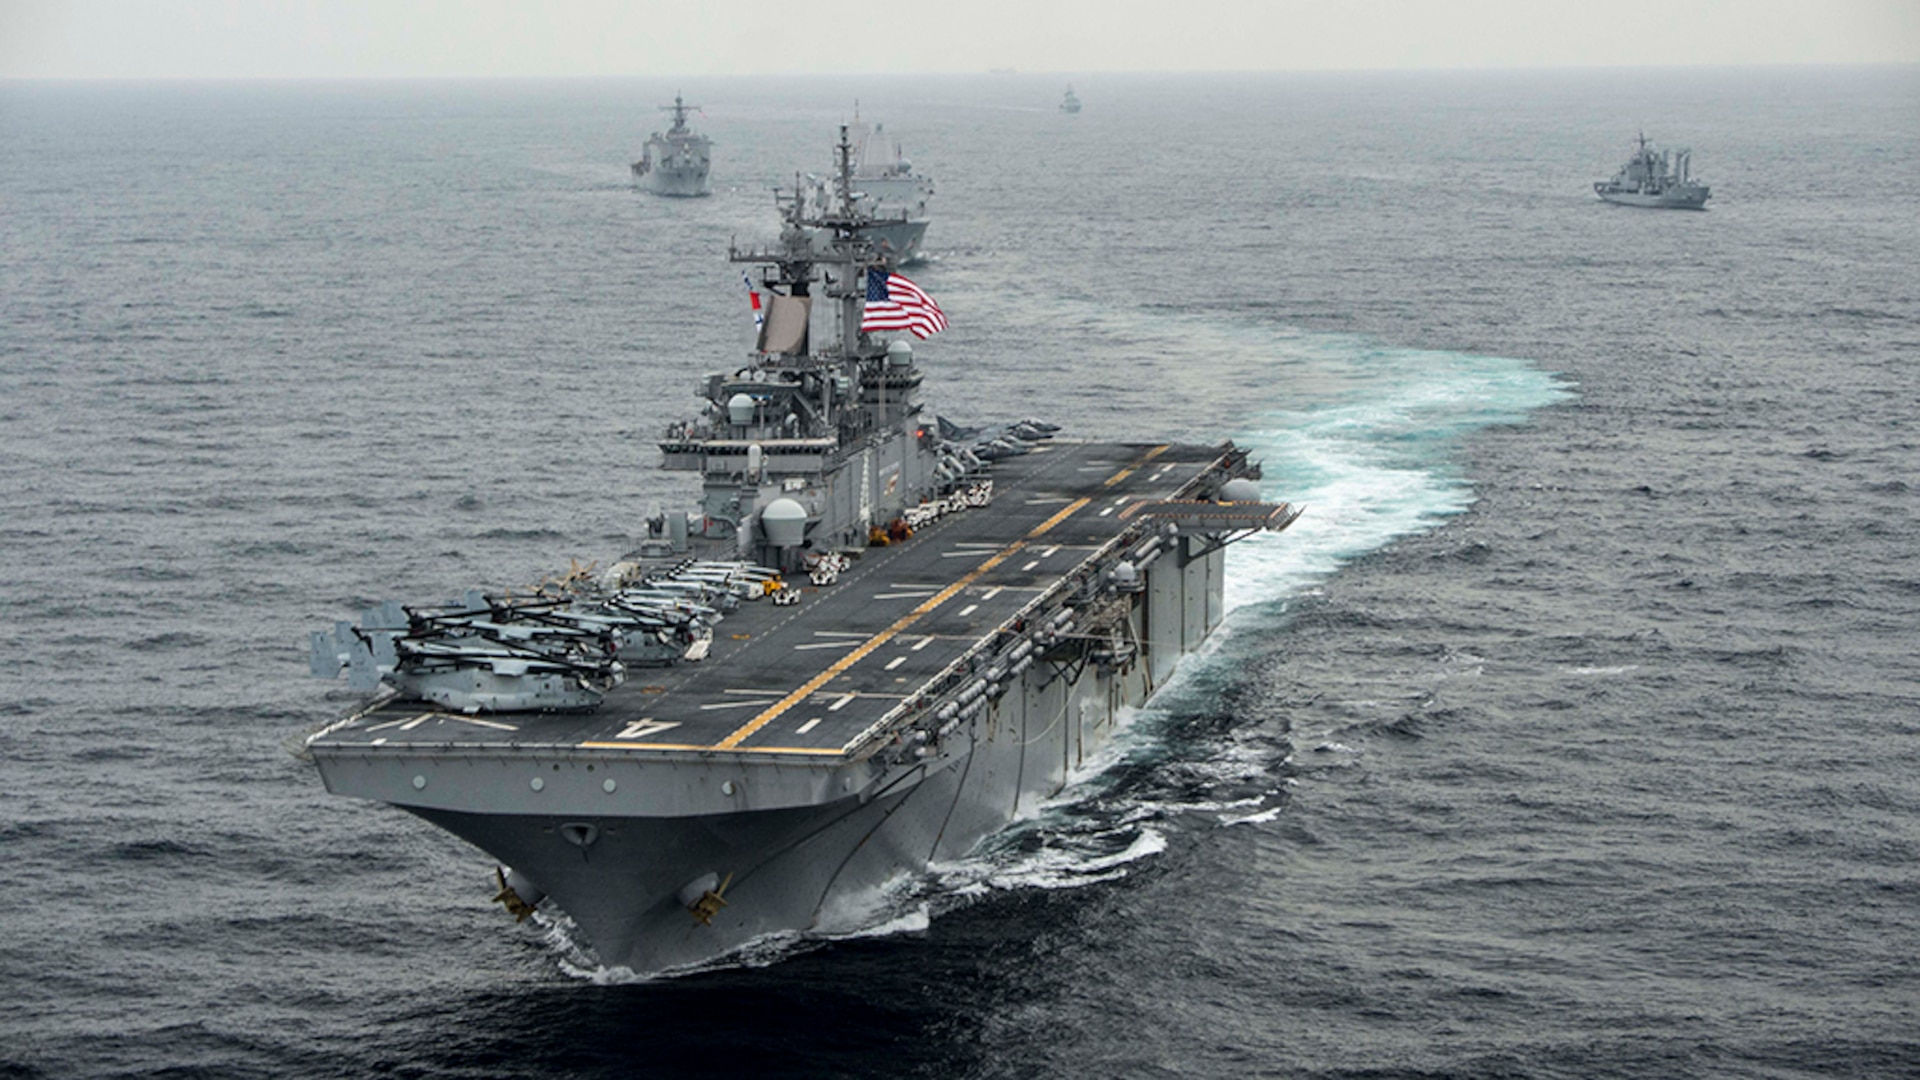 EAST SEA (March 8, 2016) The amphibious assault ship USS Boxer (LHD 4) transits the east sea during Exercise Ssang Yong 2016. Boxer is the flagship of the Boxer Amphibious Ready Group and is participating in exercise Ssang Yong 16. Ssang Yong 16 is a biennial combined amphibious exercise conducted by forward-deployed U.S. forces with the Republic of Korea Navy and Marine Corps, Australian Army and Royal New Zealand Army Forces in order to strengthen our interoperability and working relationships across a wide range of military operations - from disaster relief to complex expeditionary operations. 